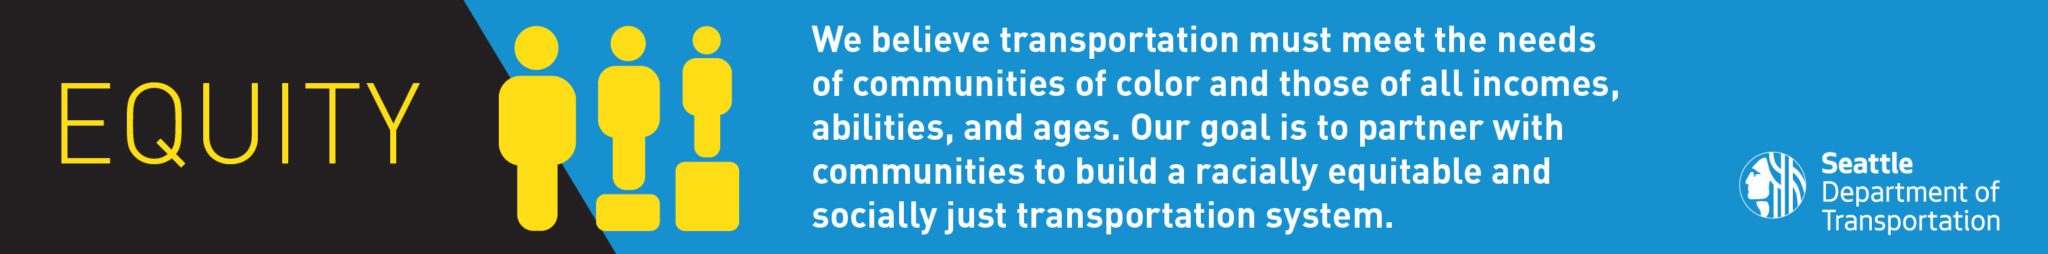 Graphic icon showcasing equity, one of SDOT's core values and goals.